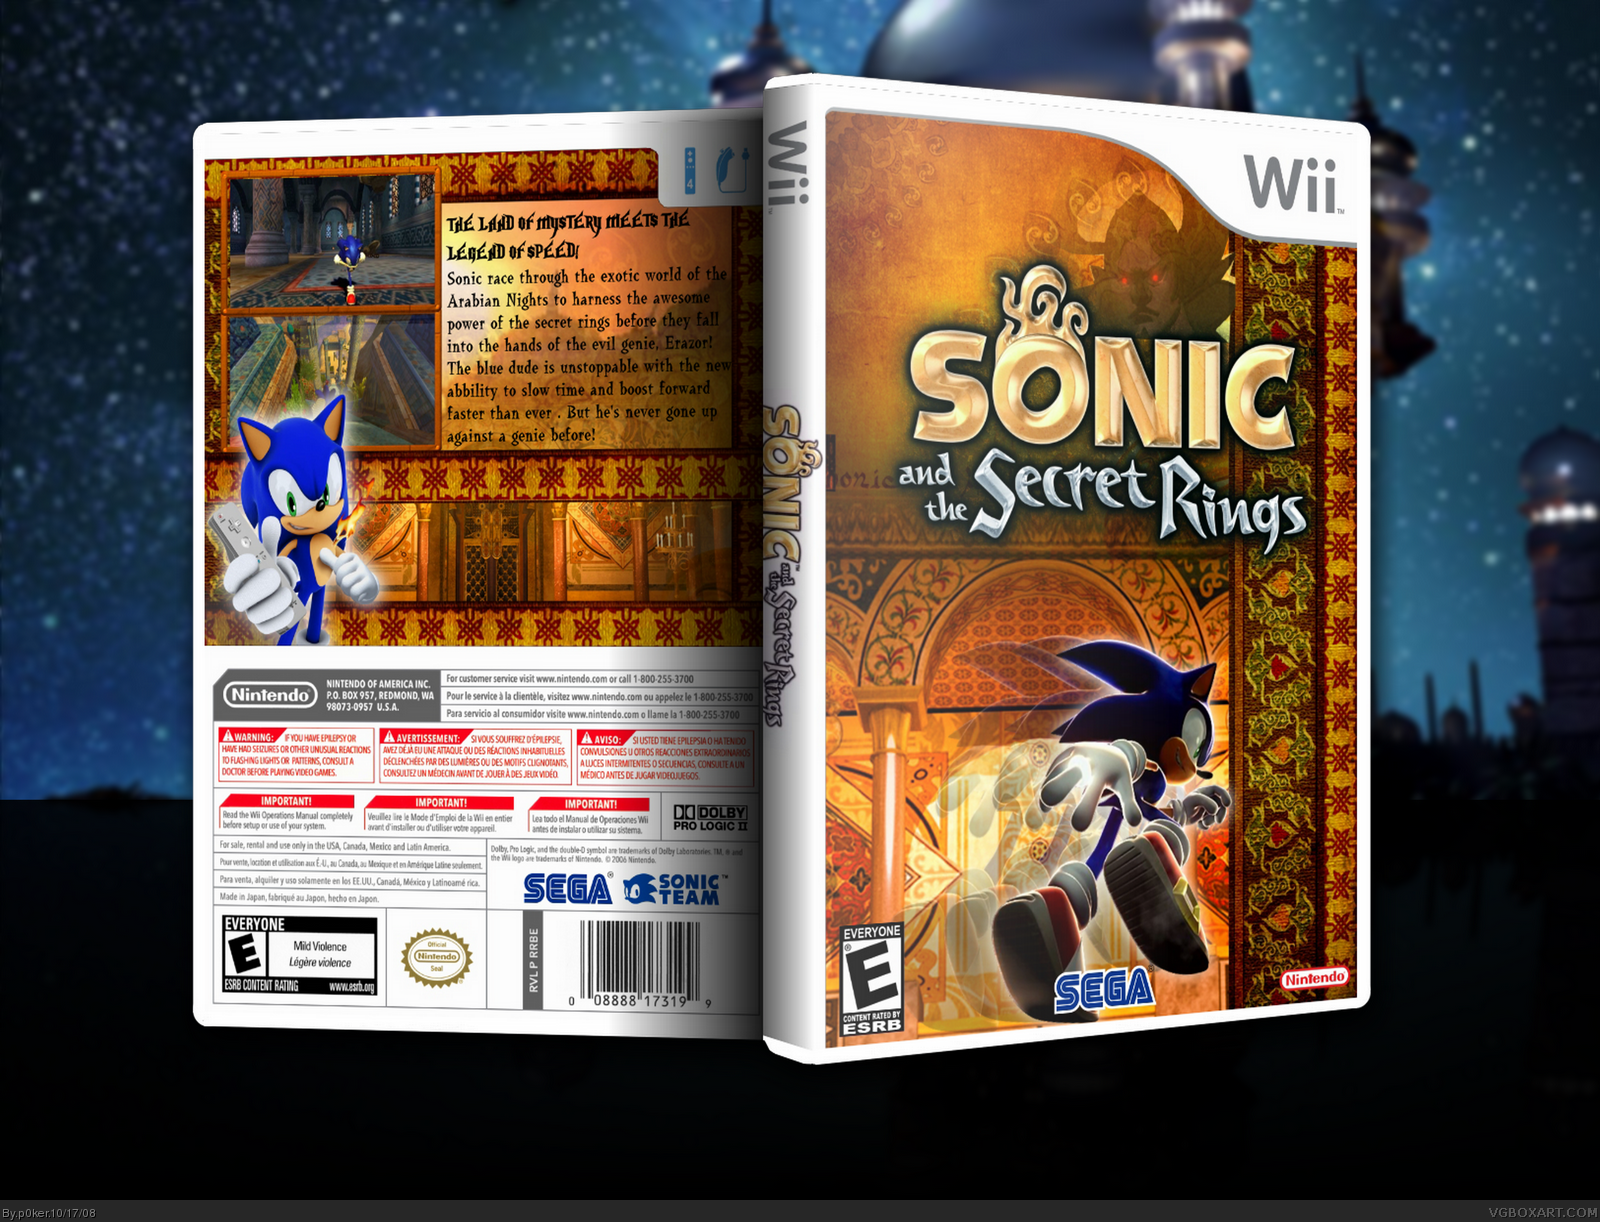 Sonic and the Secret Rings box cover